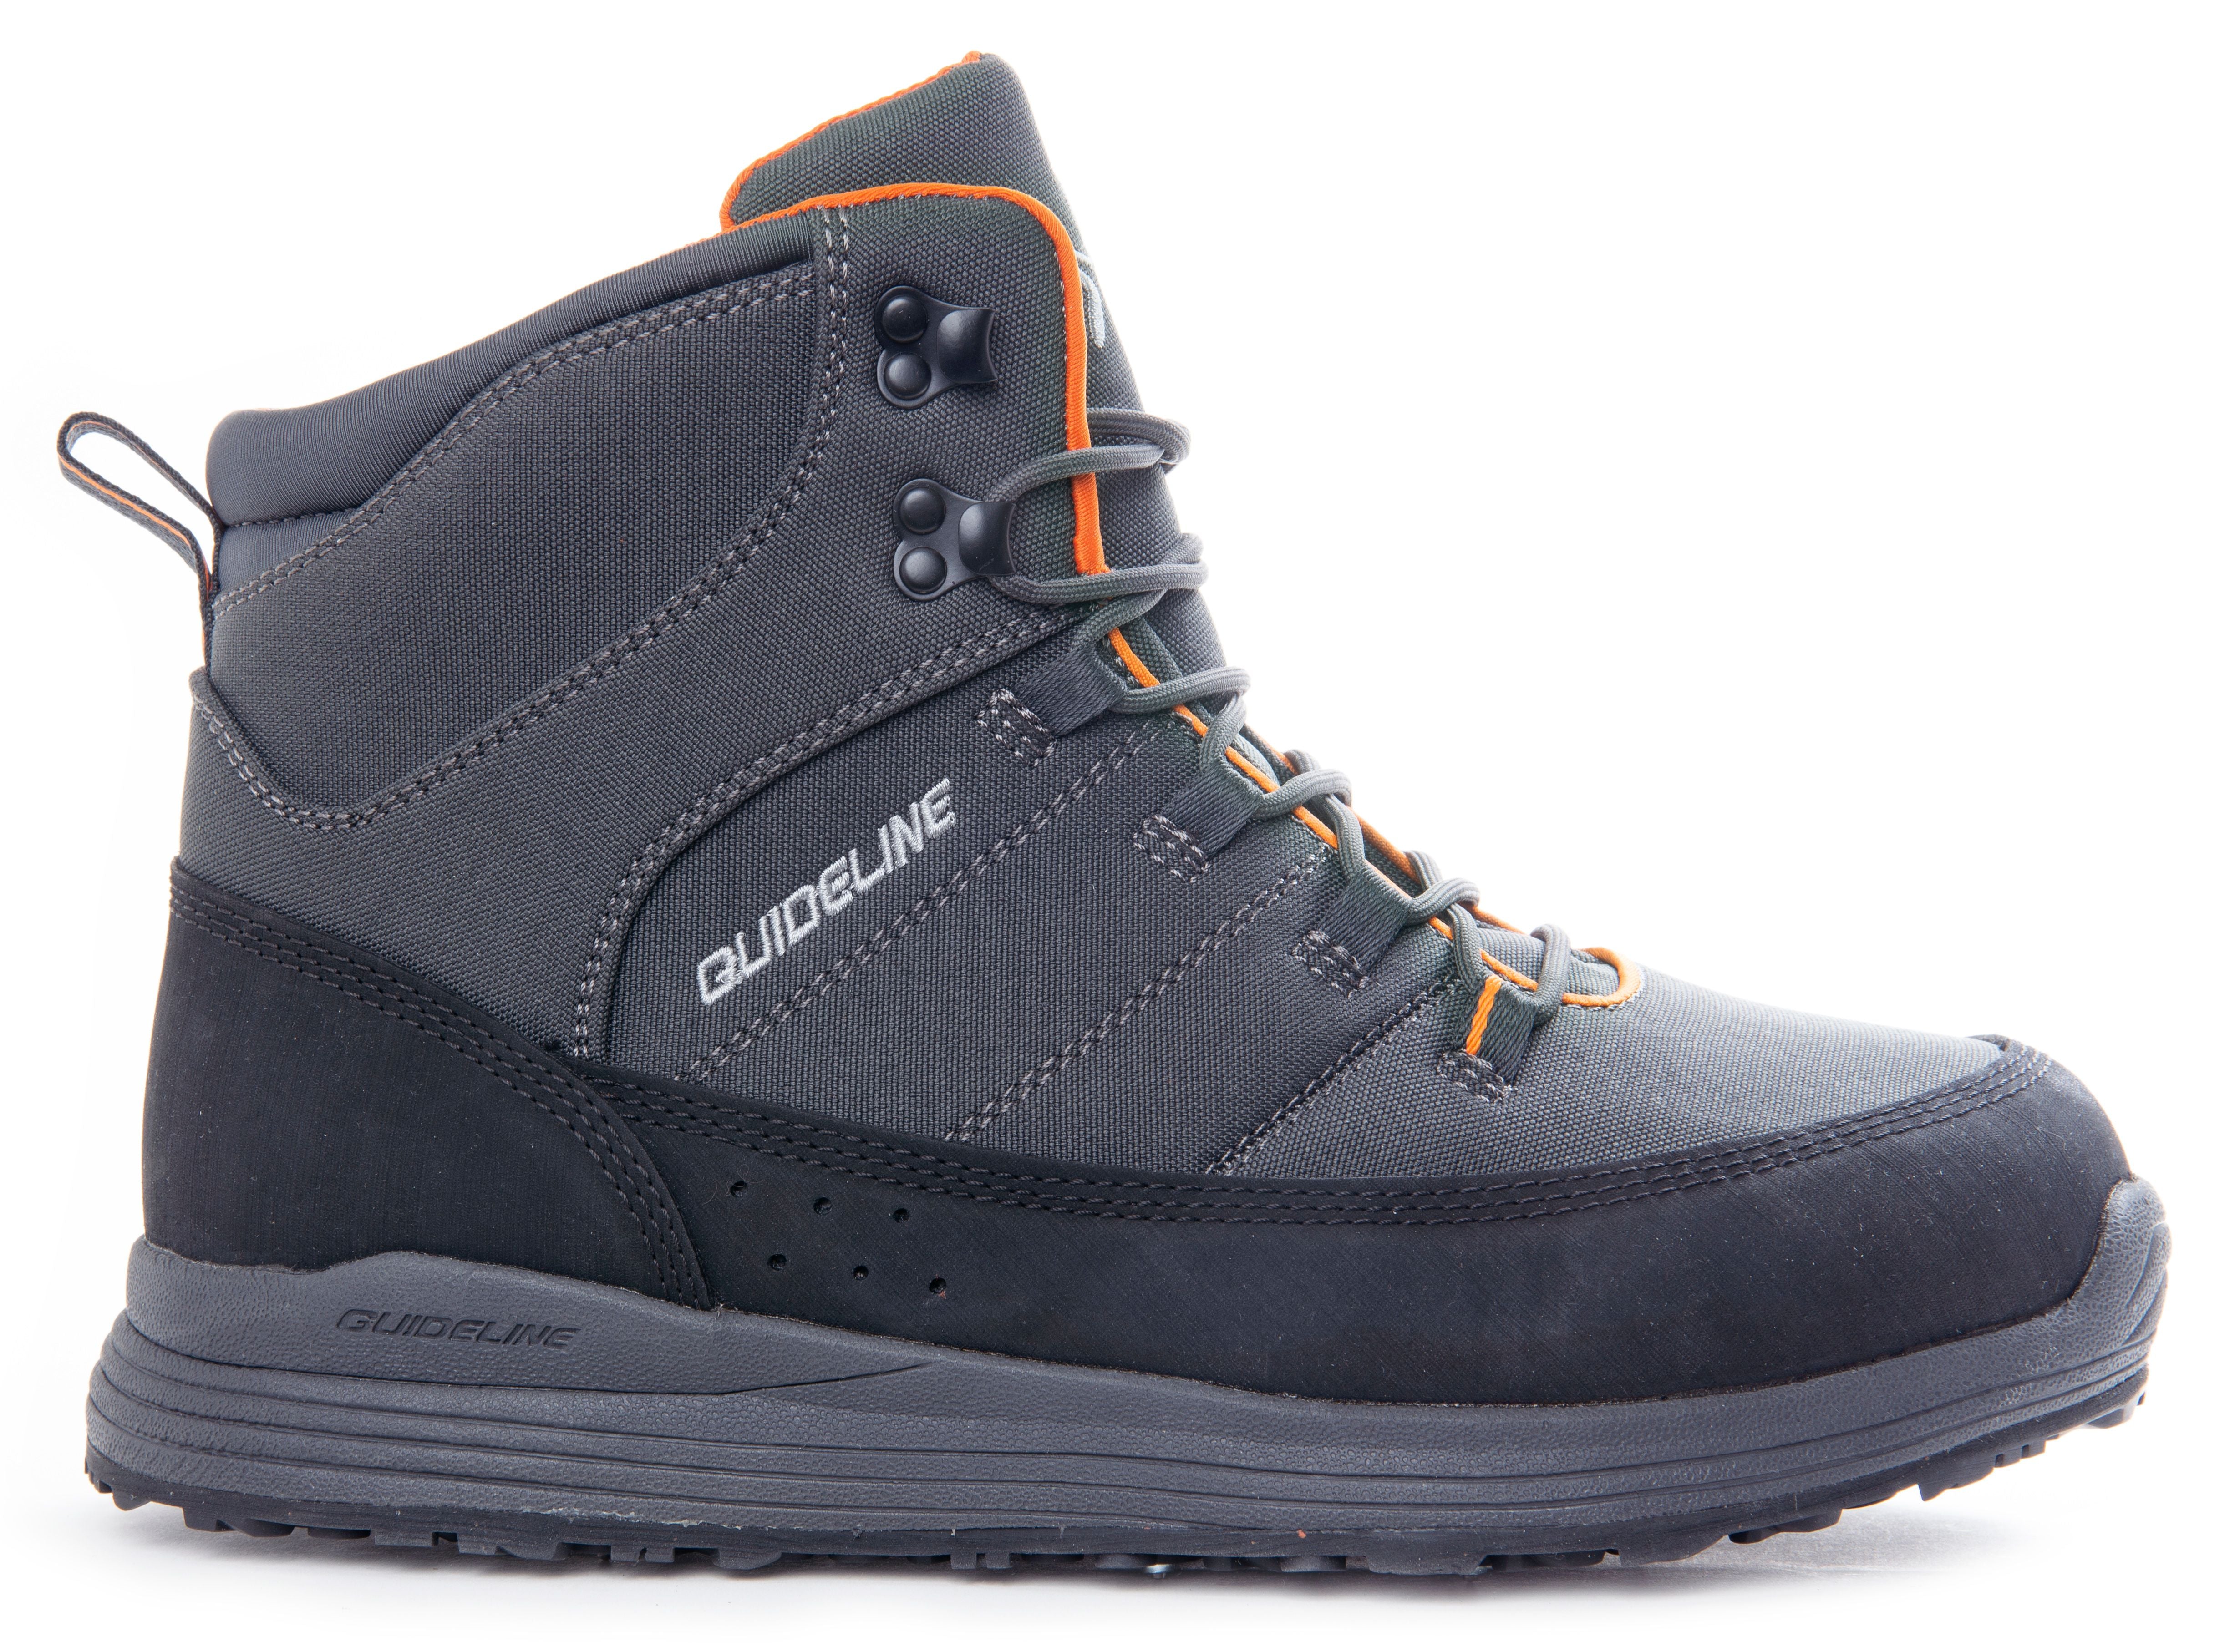 GUIDELINE LAXA 3.0 TRACTION SOLE WADING BOOT